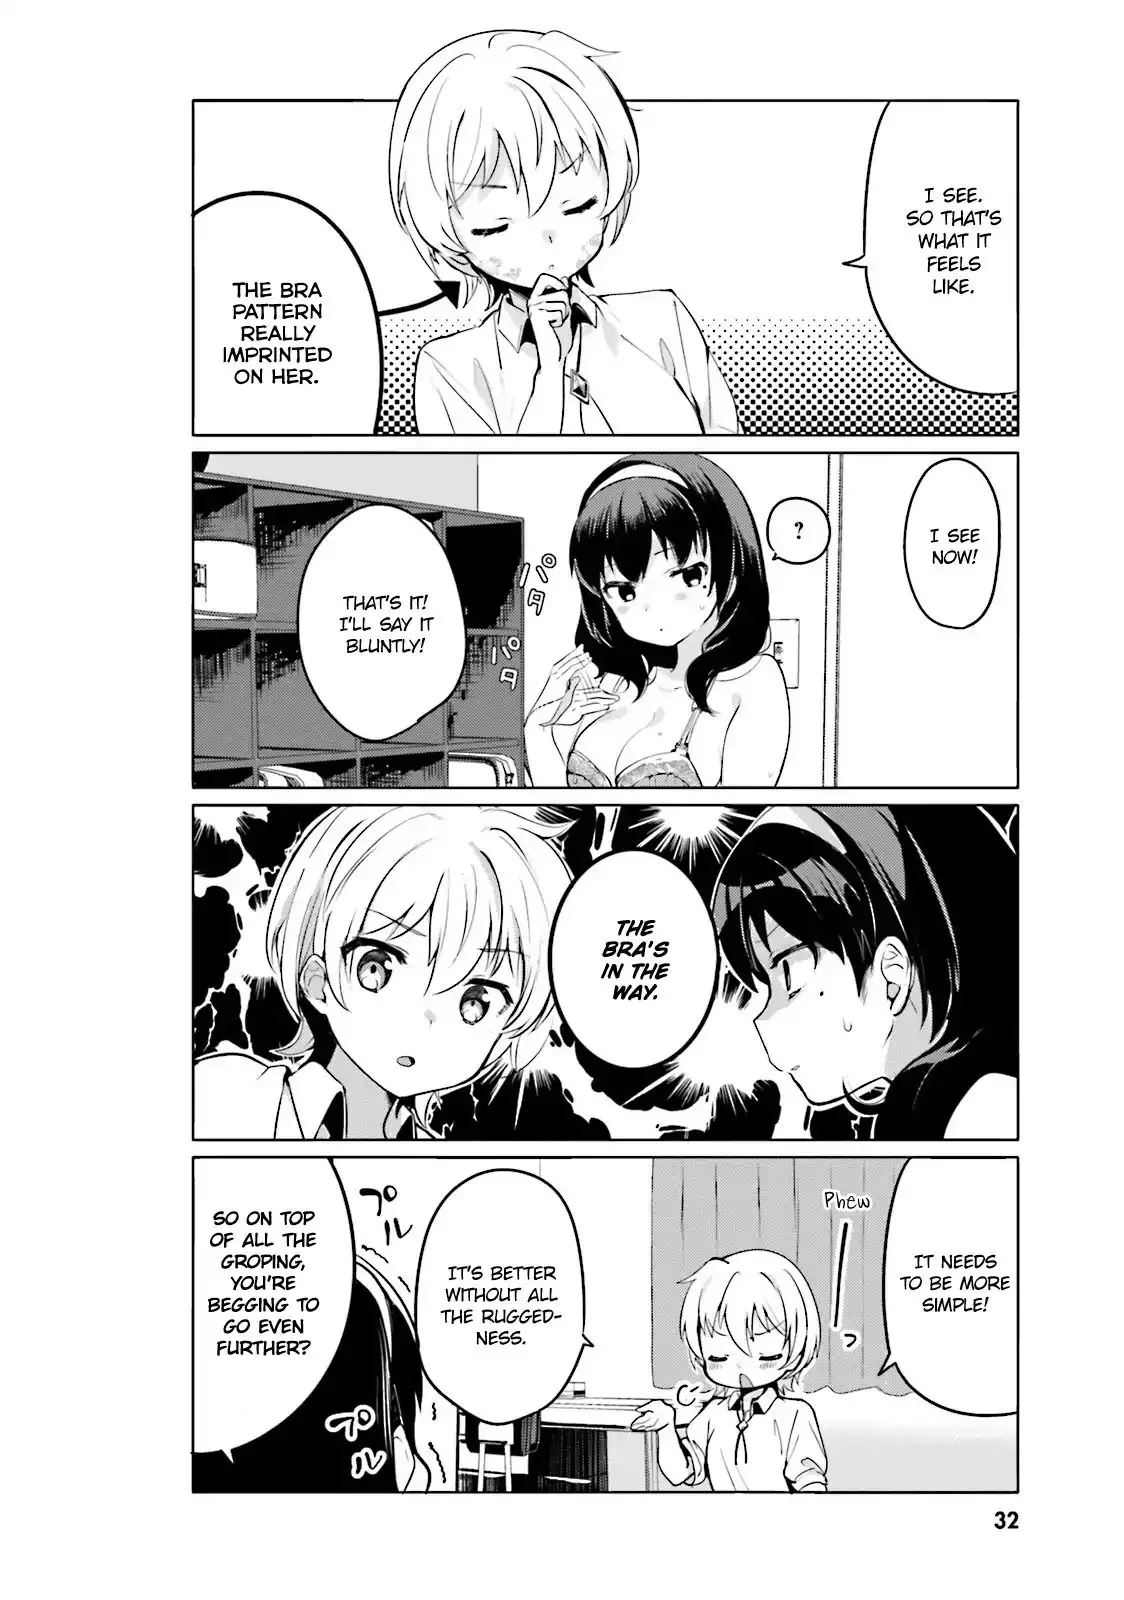 I Like Oppai Best In The World! - 2 page 6